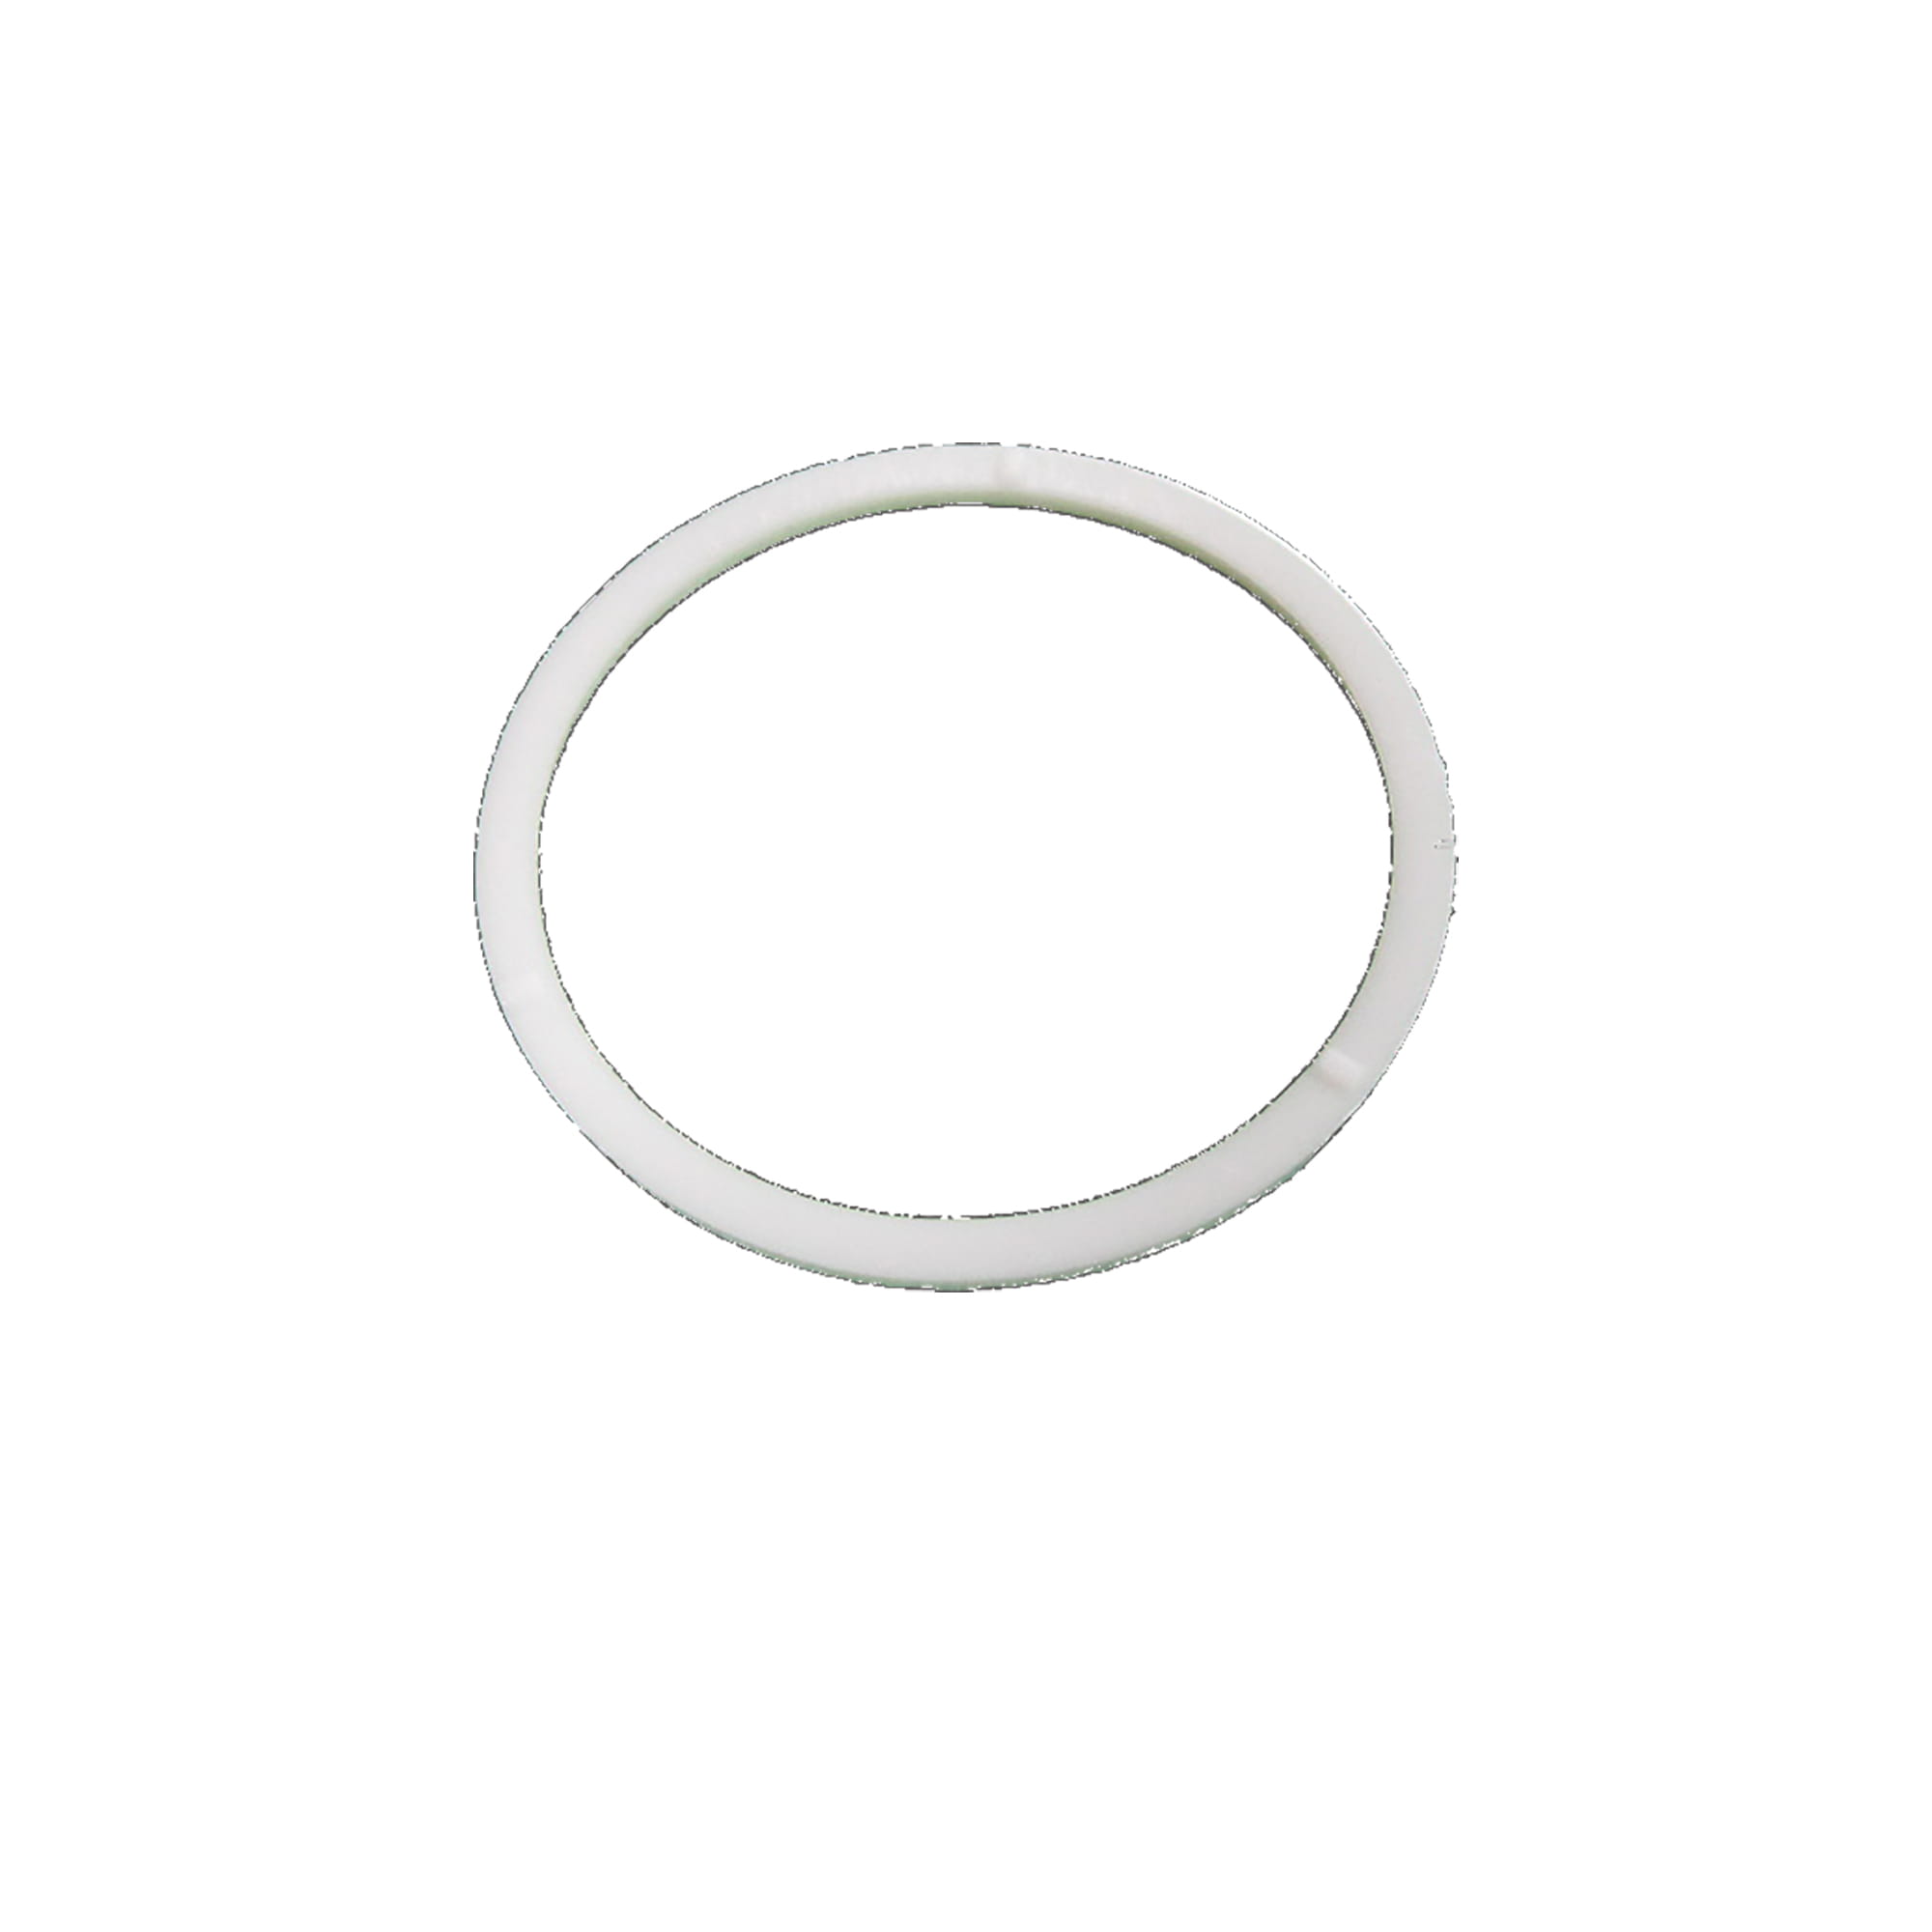 Bearing Washer for Colony Soft Faucet NO FINISH